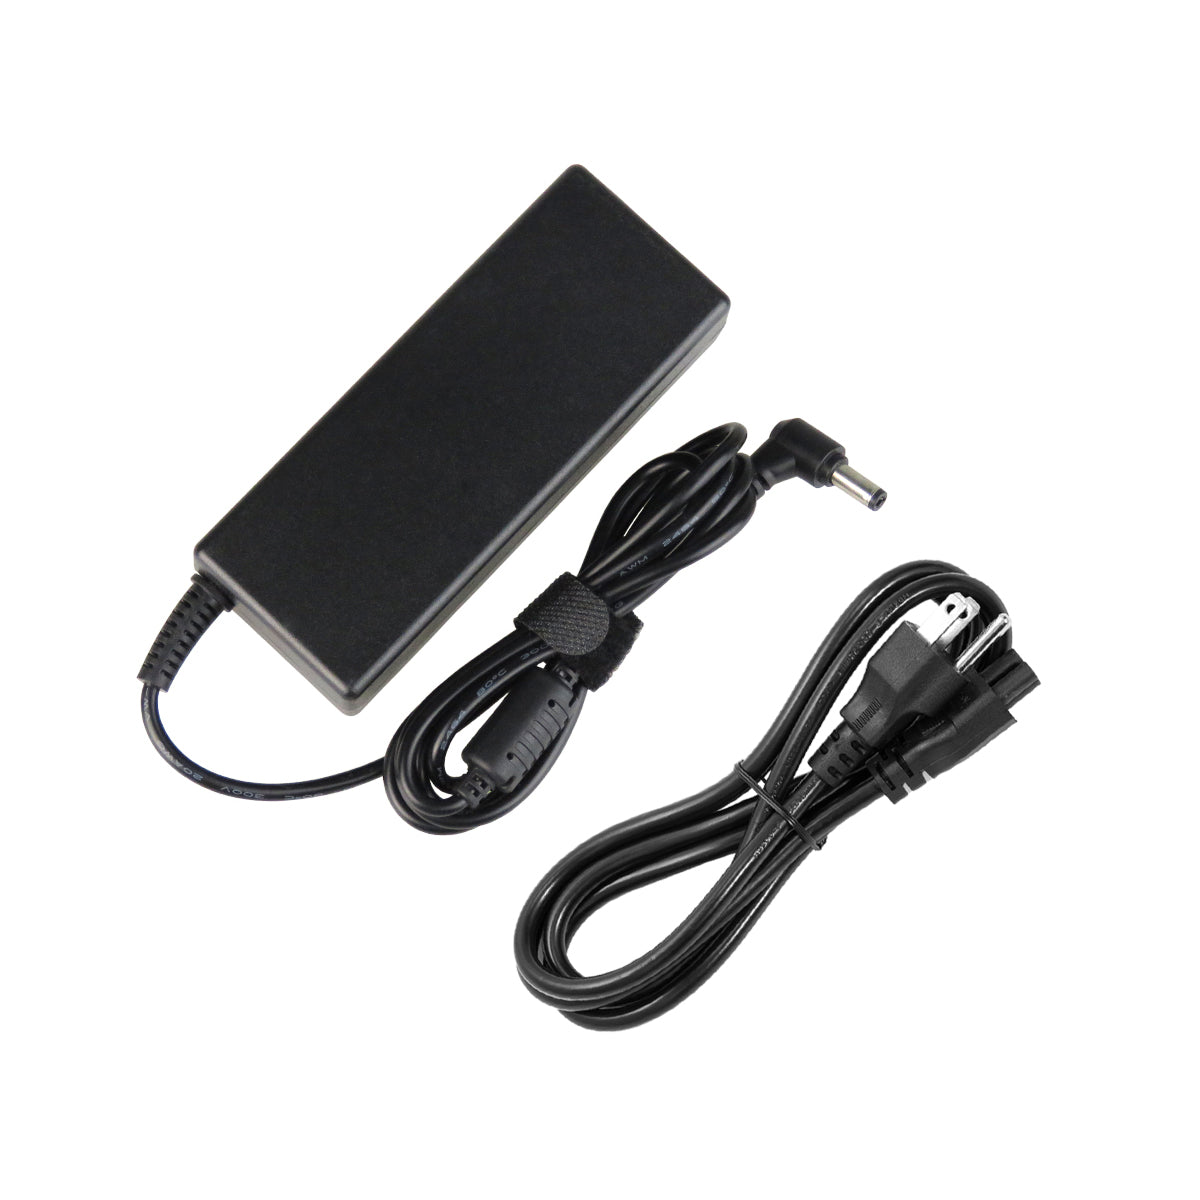 AC Adapter Charger for Toshiba Satellite p70 Notebook.